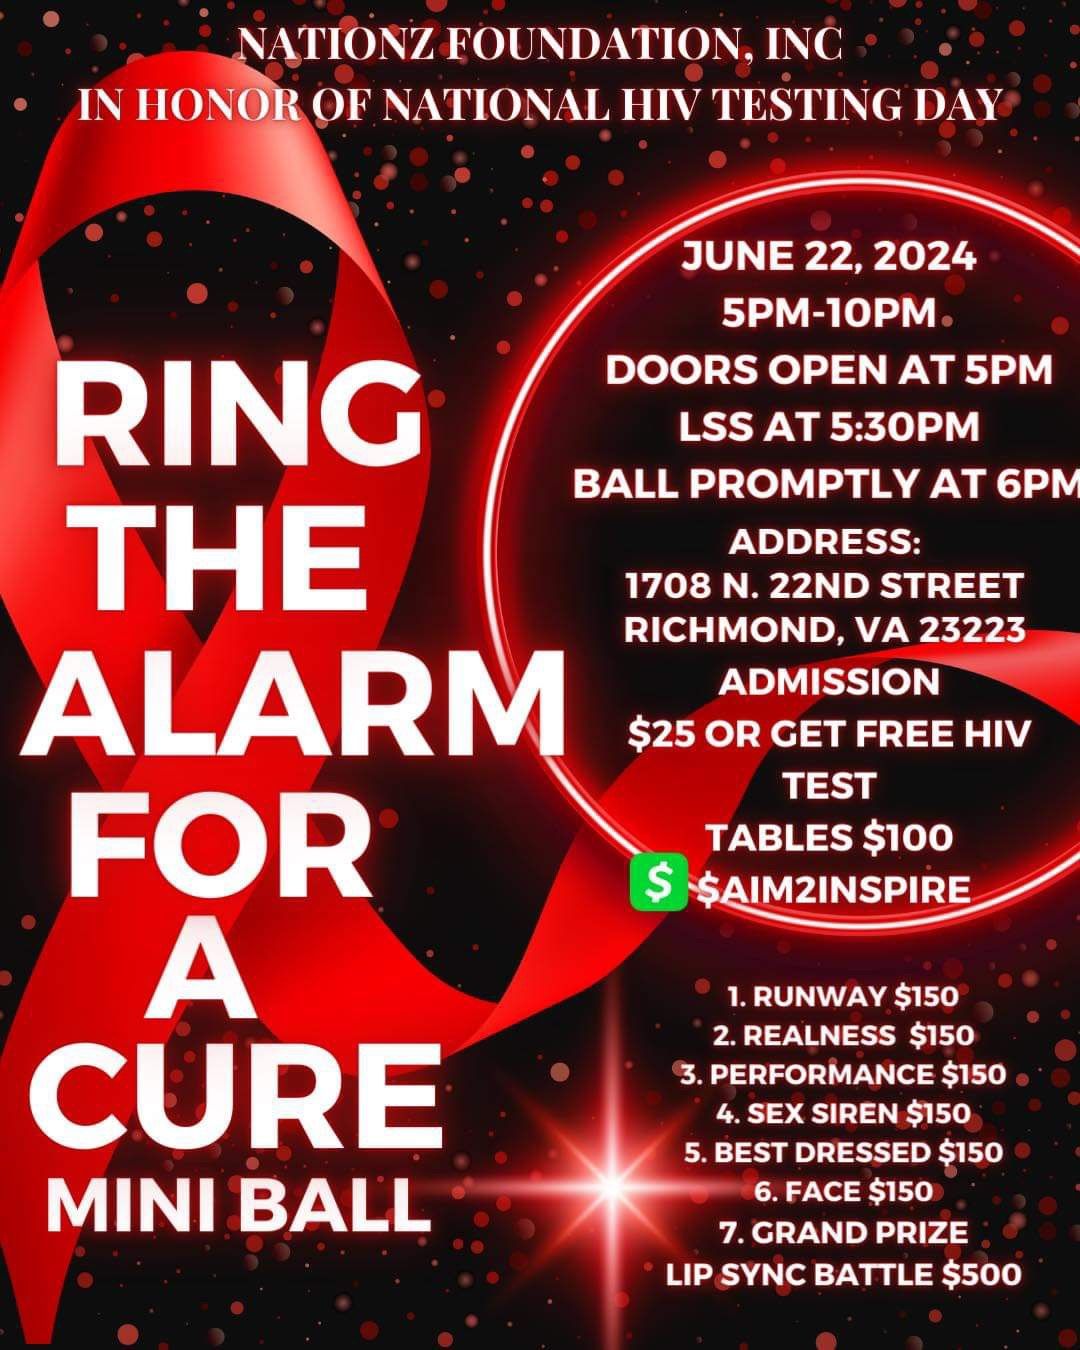 RING THE ALARM \ud83d\udea8 for a Cure